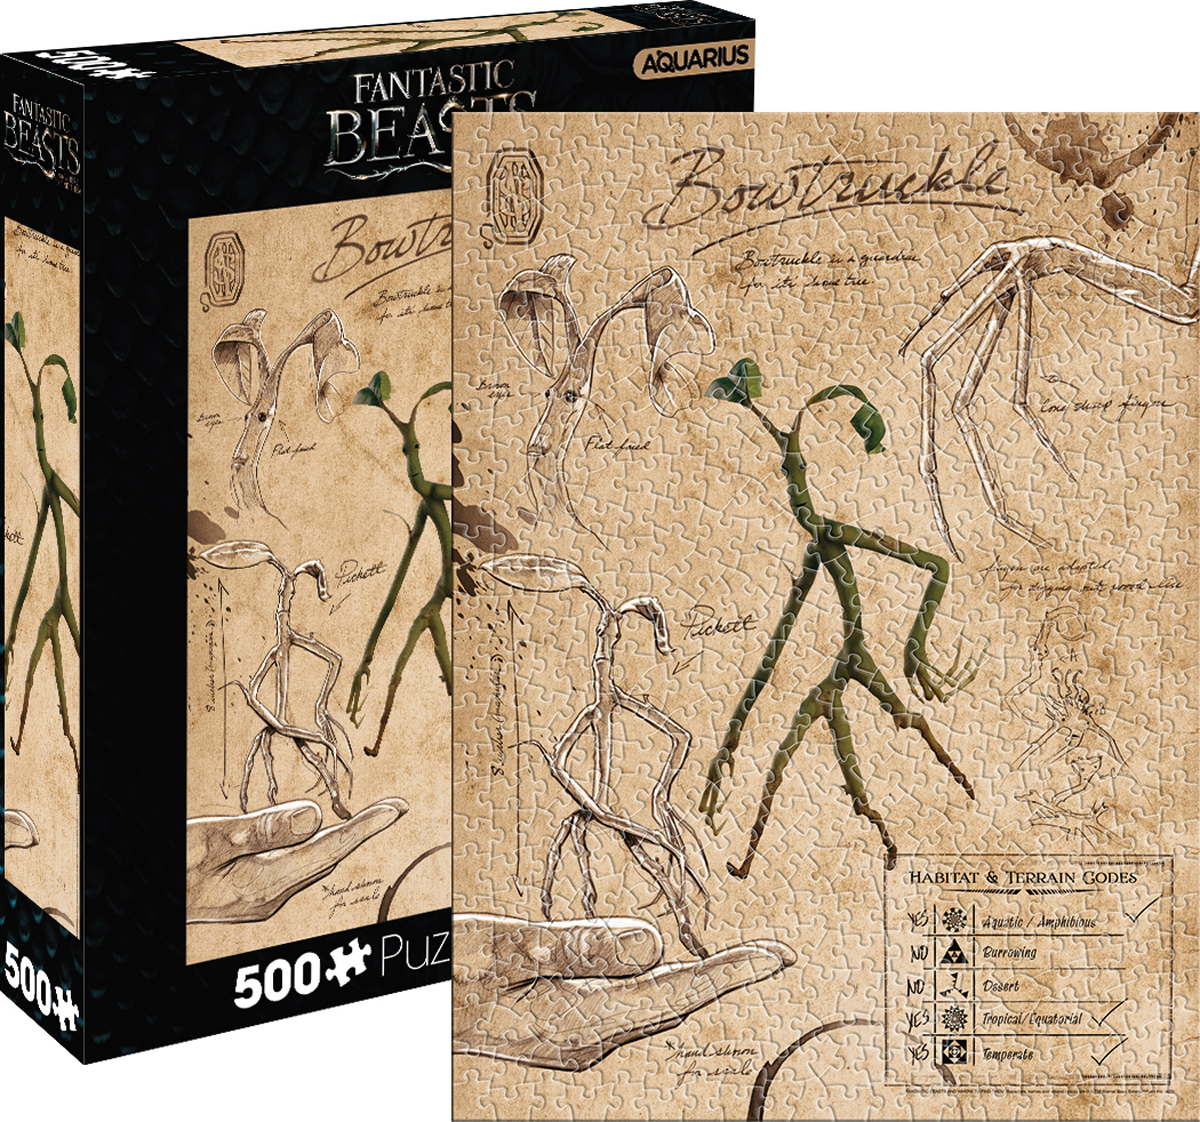 Fantastic Beasts Bowtruckle Movies & TV Jigsaw Puzzle